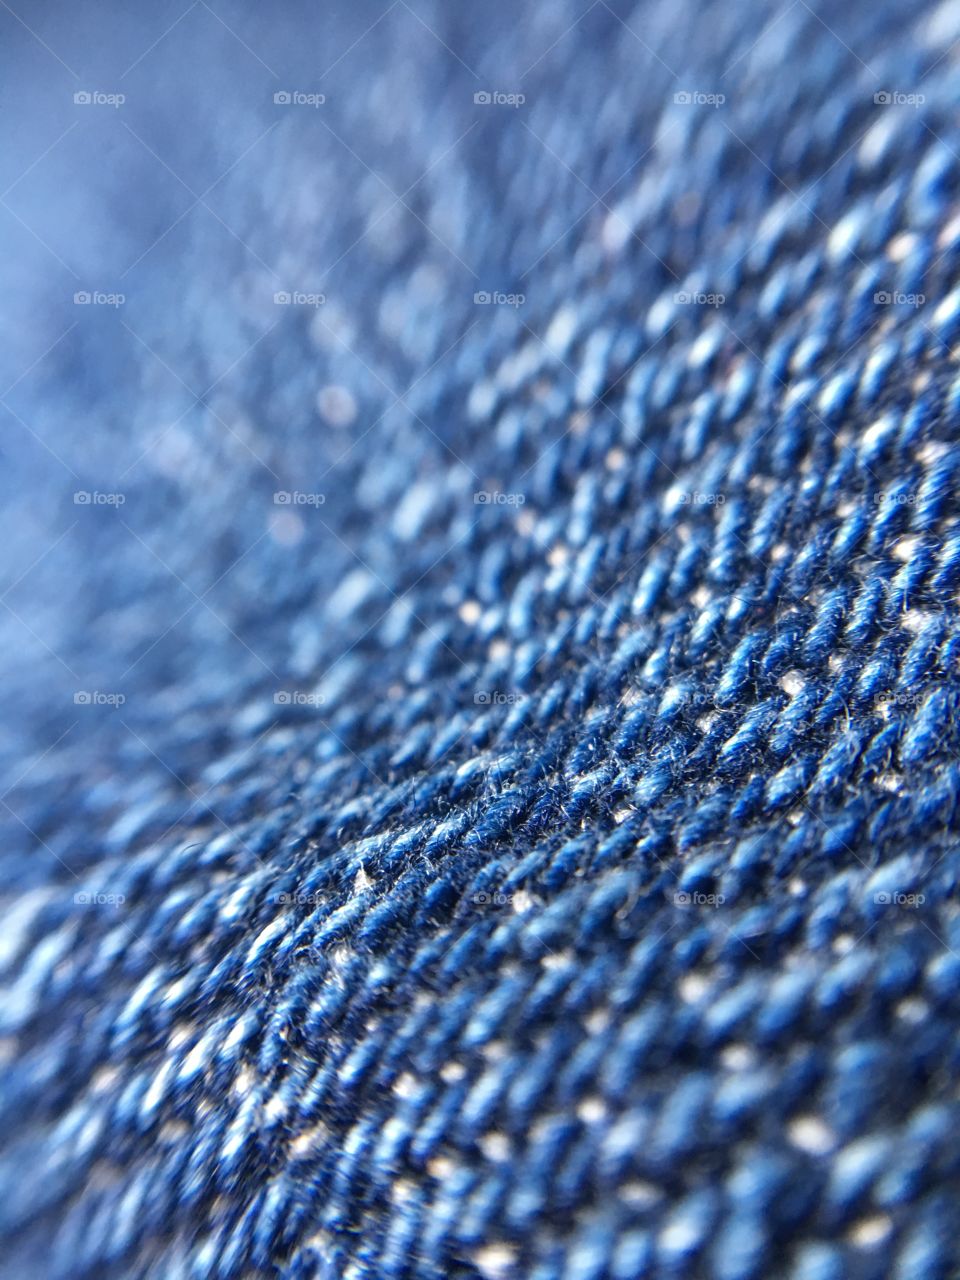 Extreme close-up of blue jean